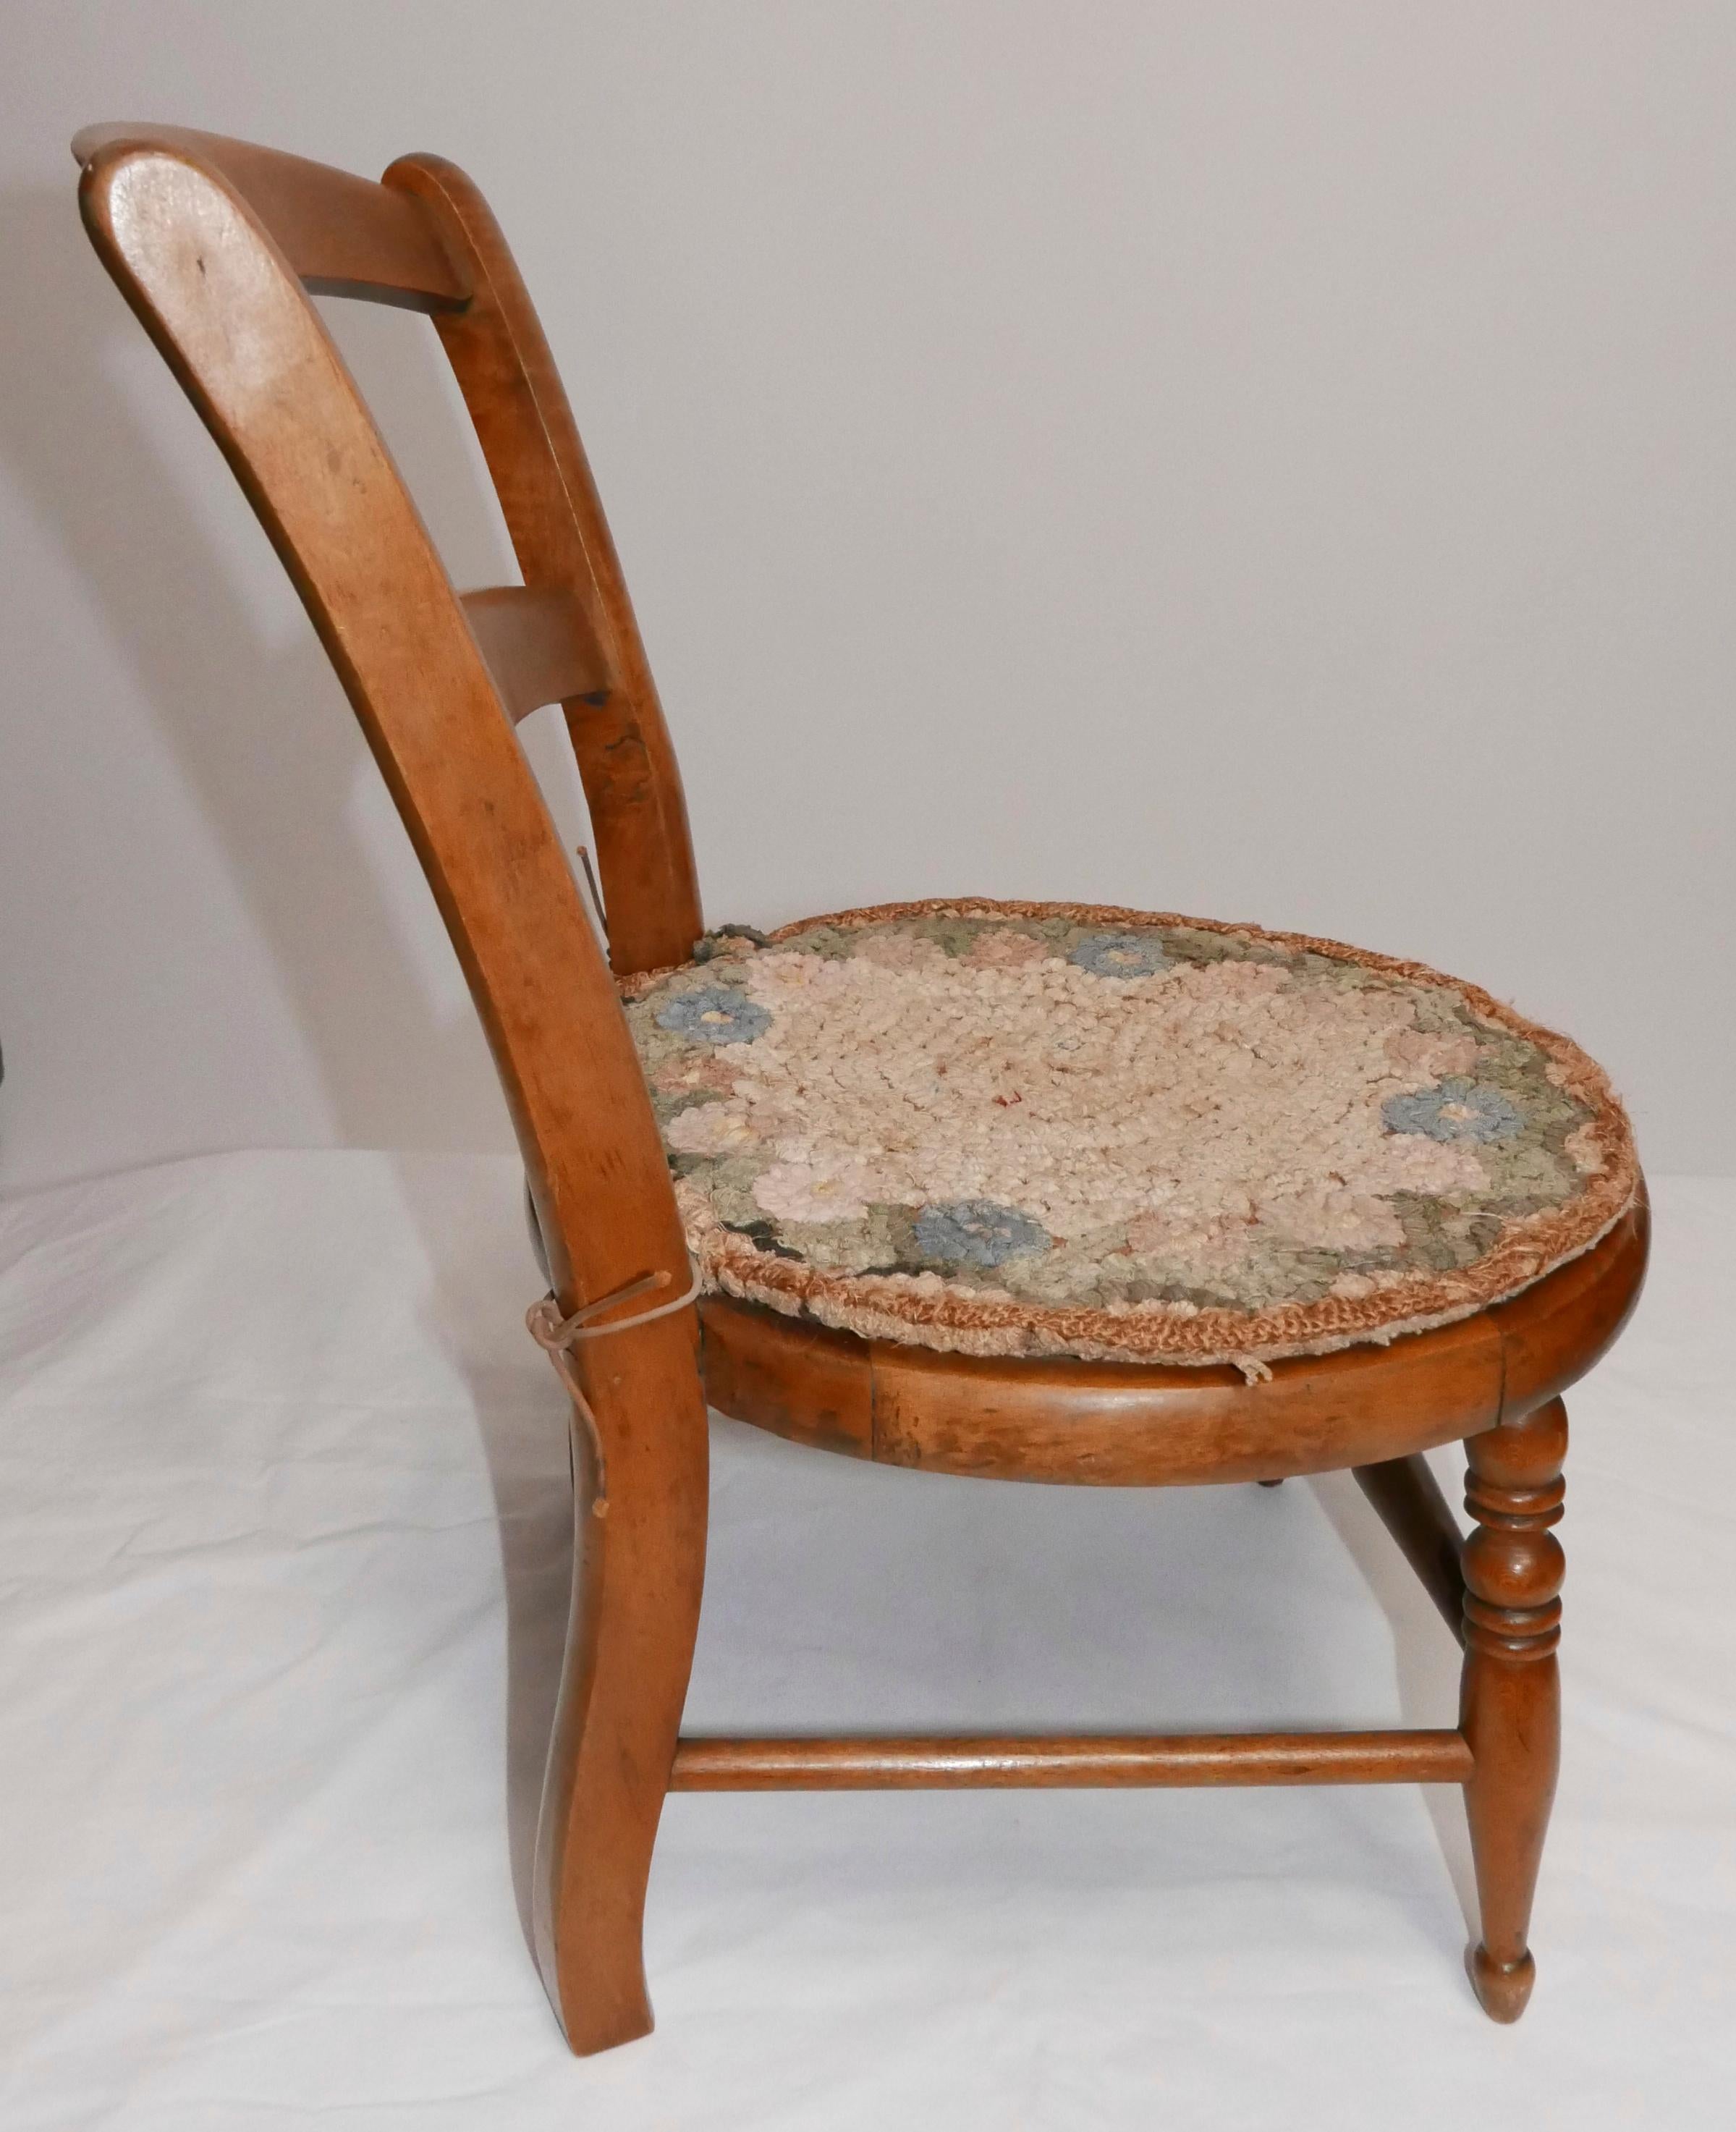 A well loved beautifully carved curly maple child's chair with handmade pad.
American, stamped: December 6 1870 - August 13 1871
In good antique condition with original patina.
 